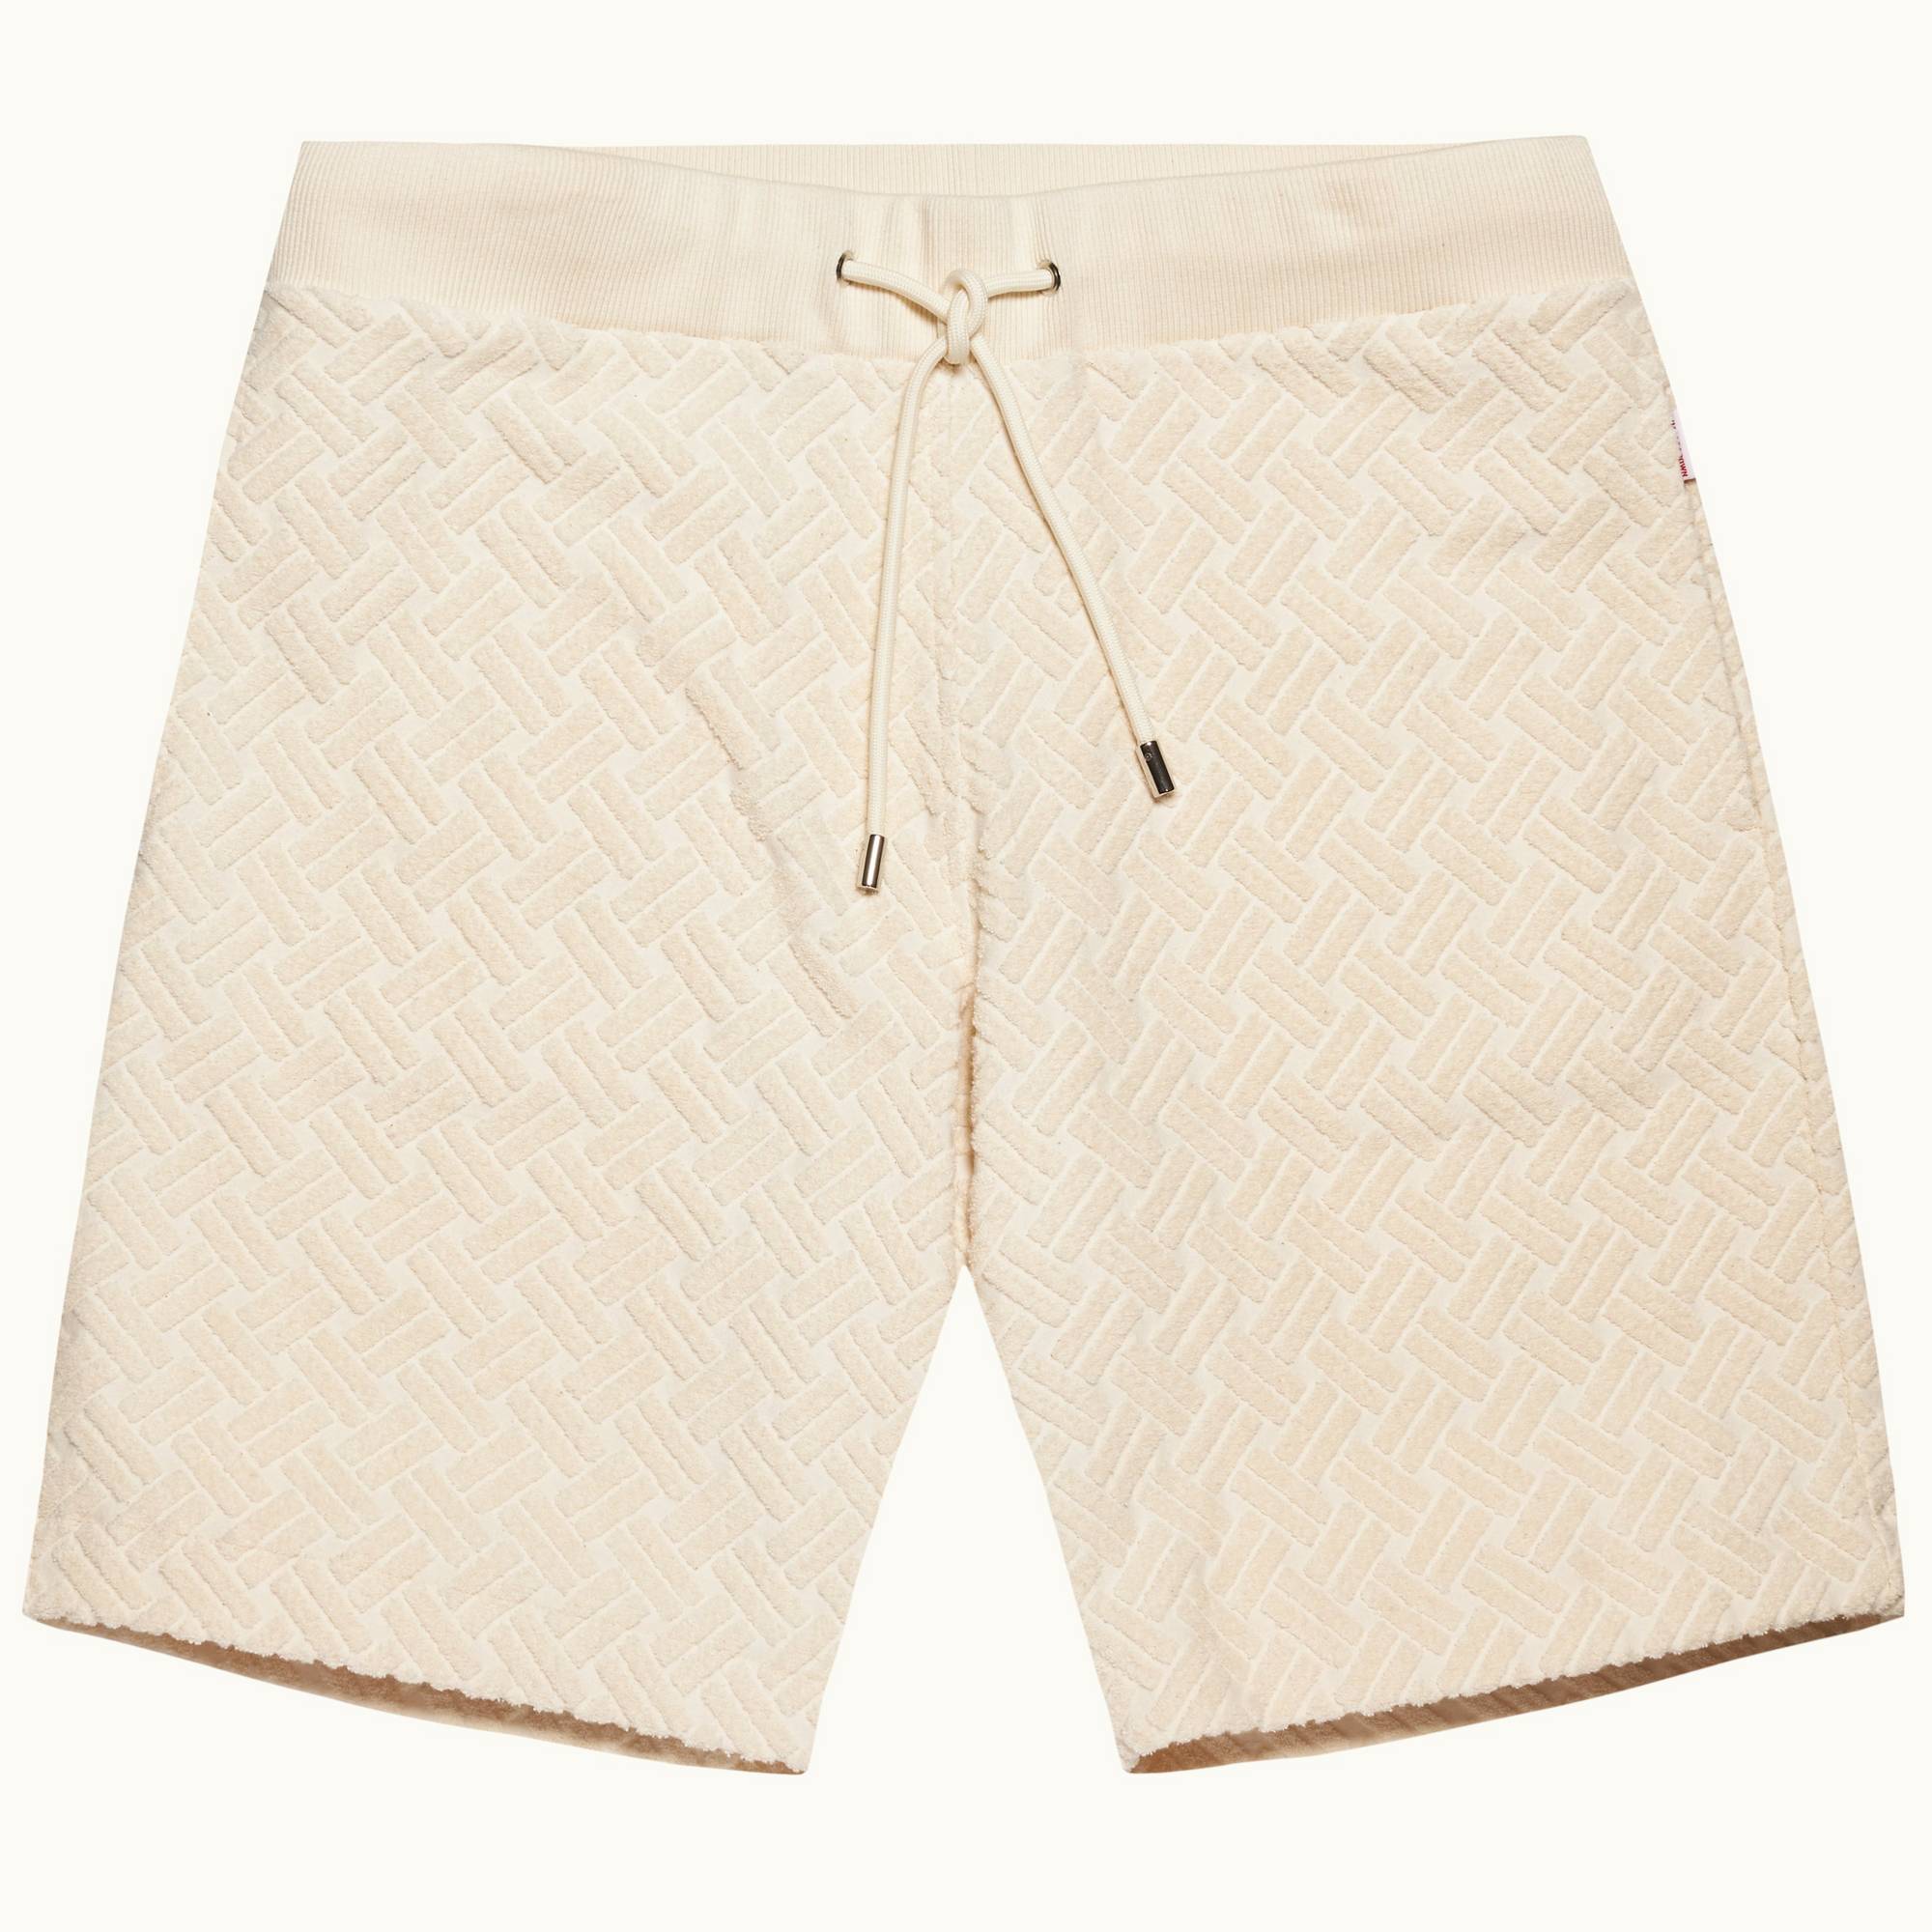 Frederick Towelling - Mens Matchstick Jacquard Rope Towelling Classic Fit Sweat Shorts